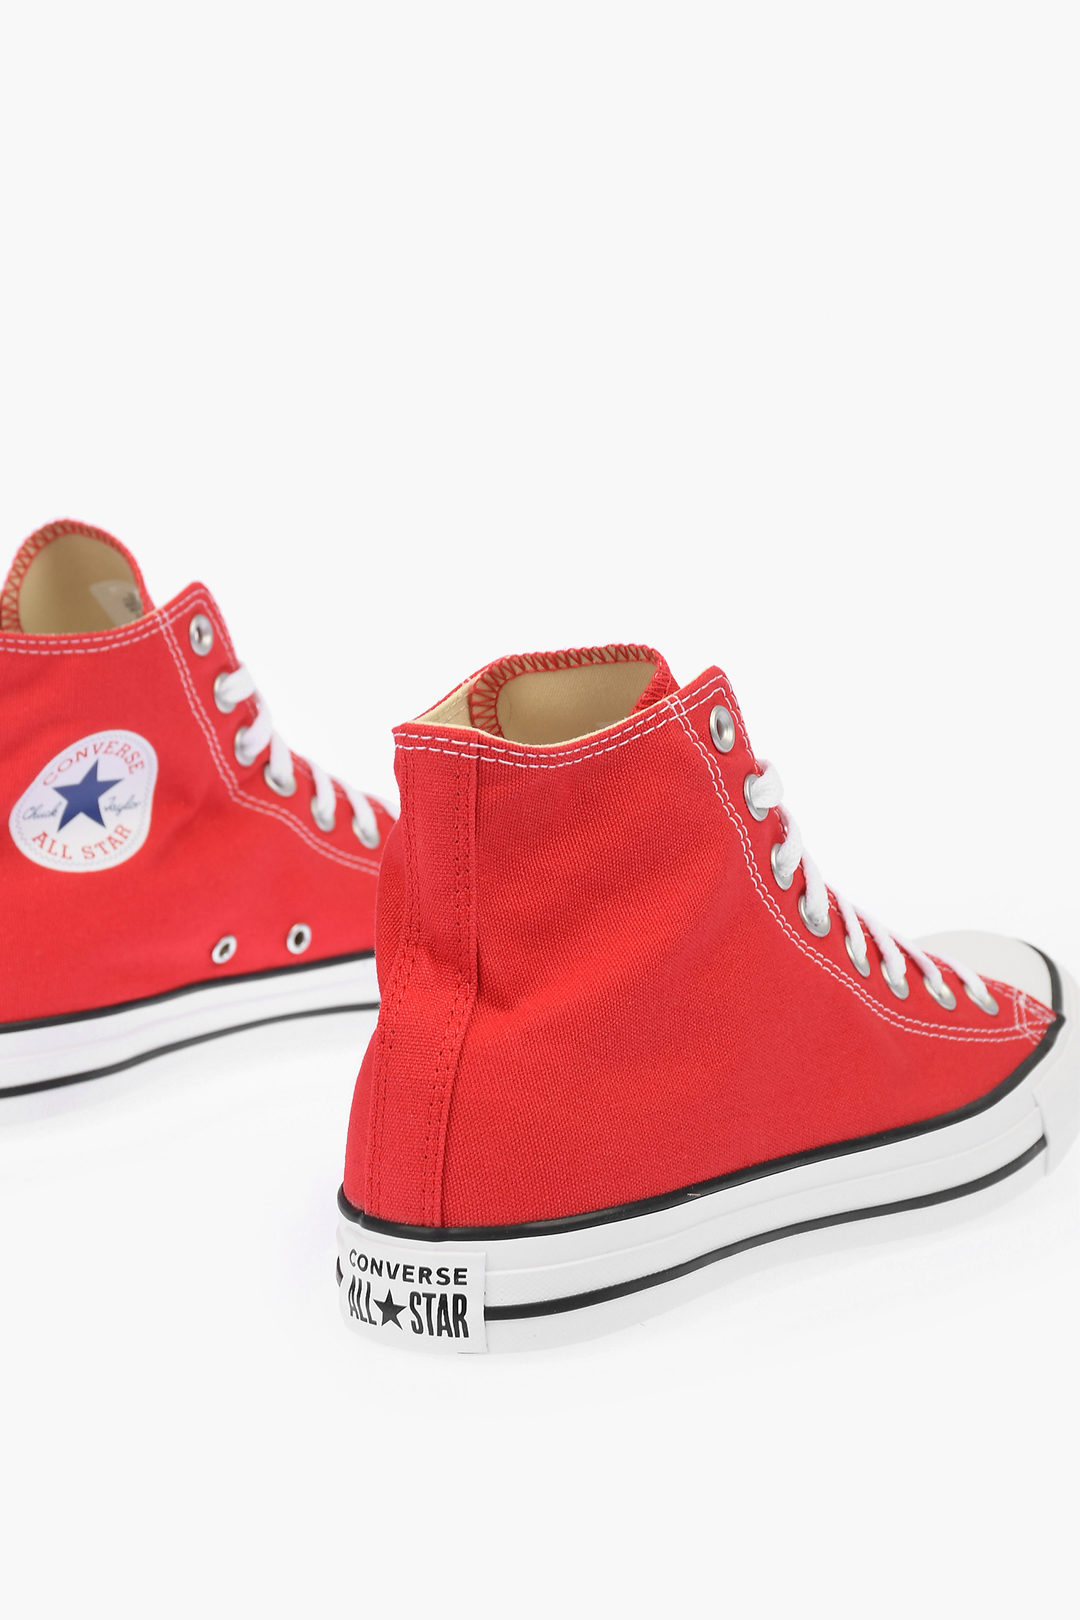 Converse ALL STAR CHUCK TAYLOR solid color fabric sneakers men - Glamood  Outlet